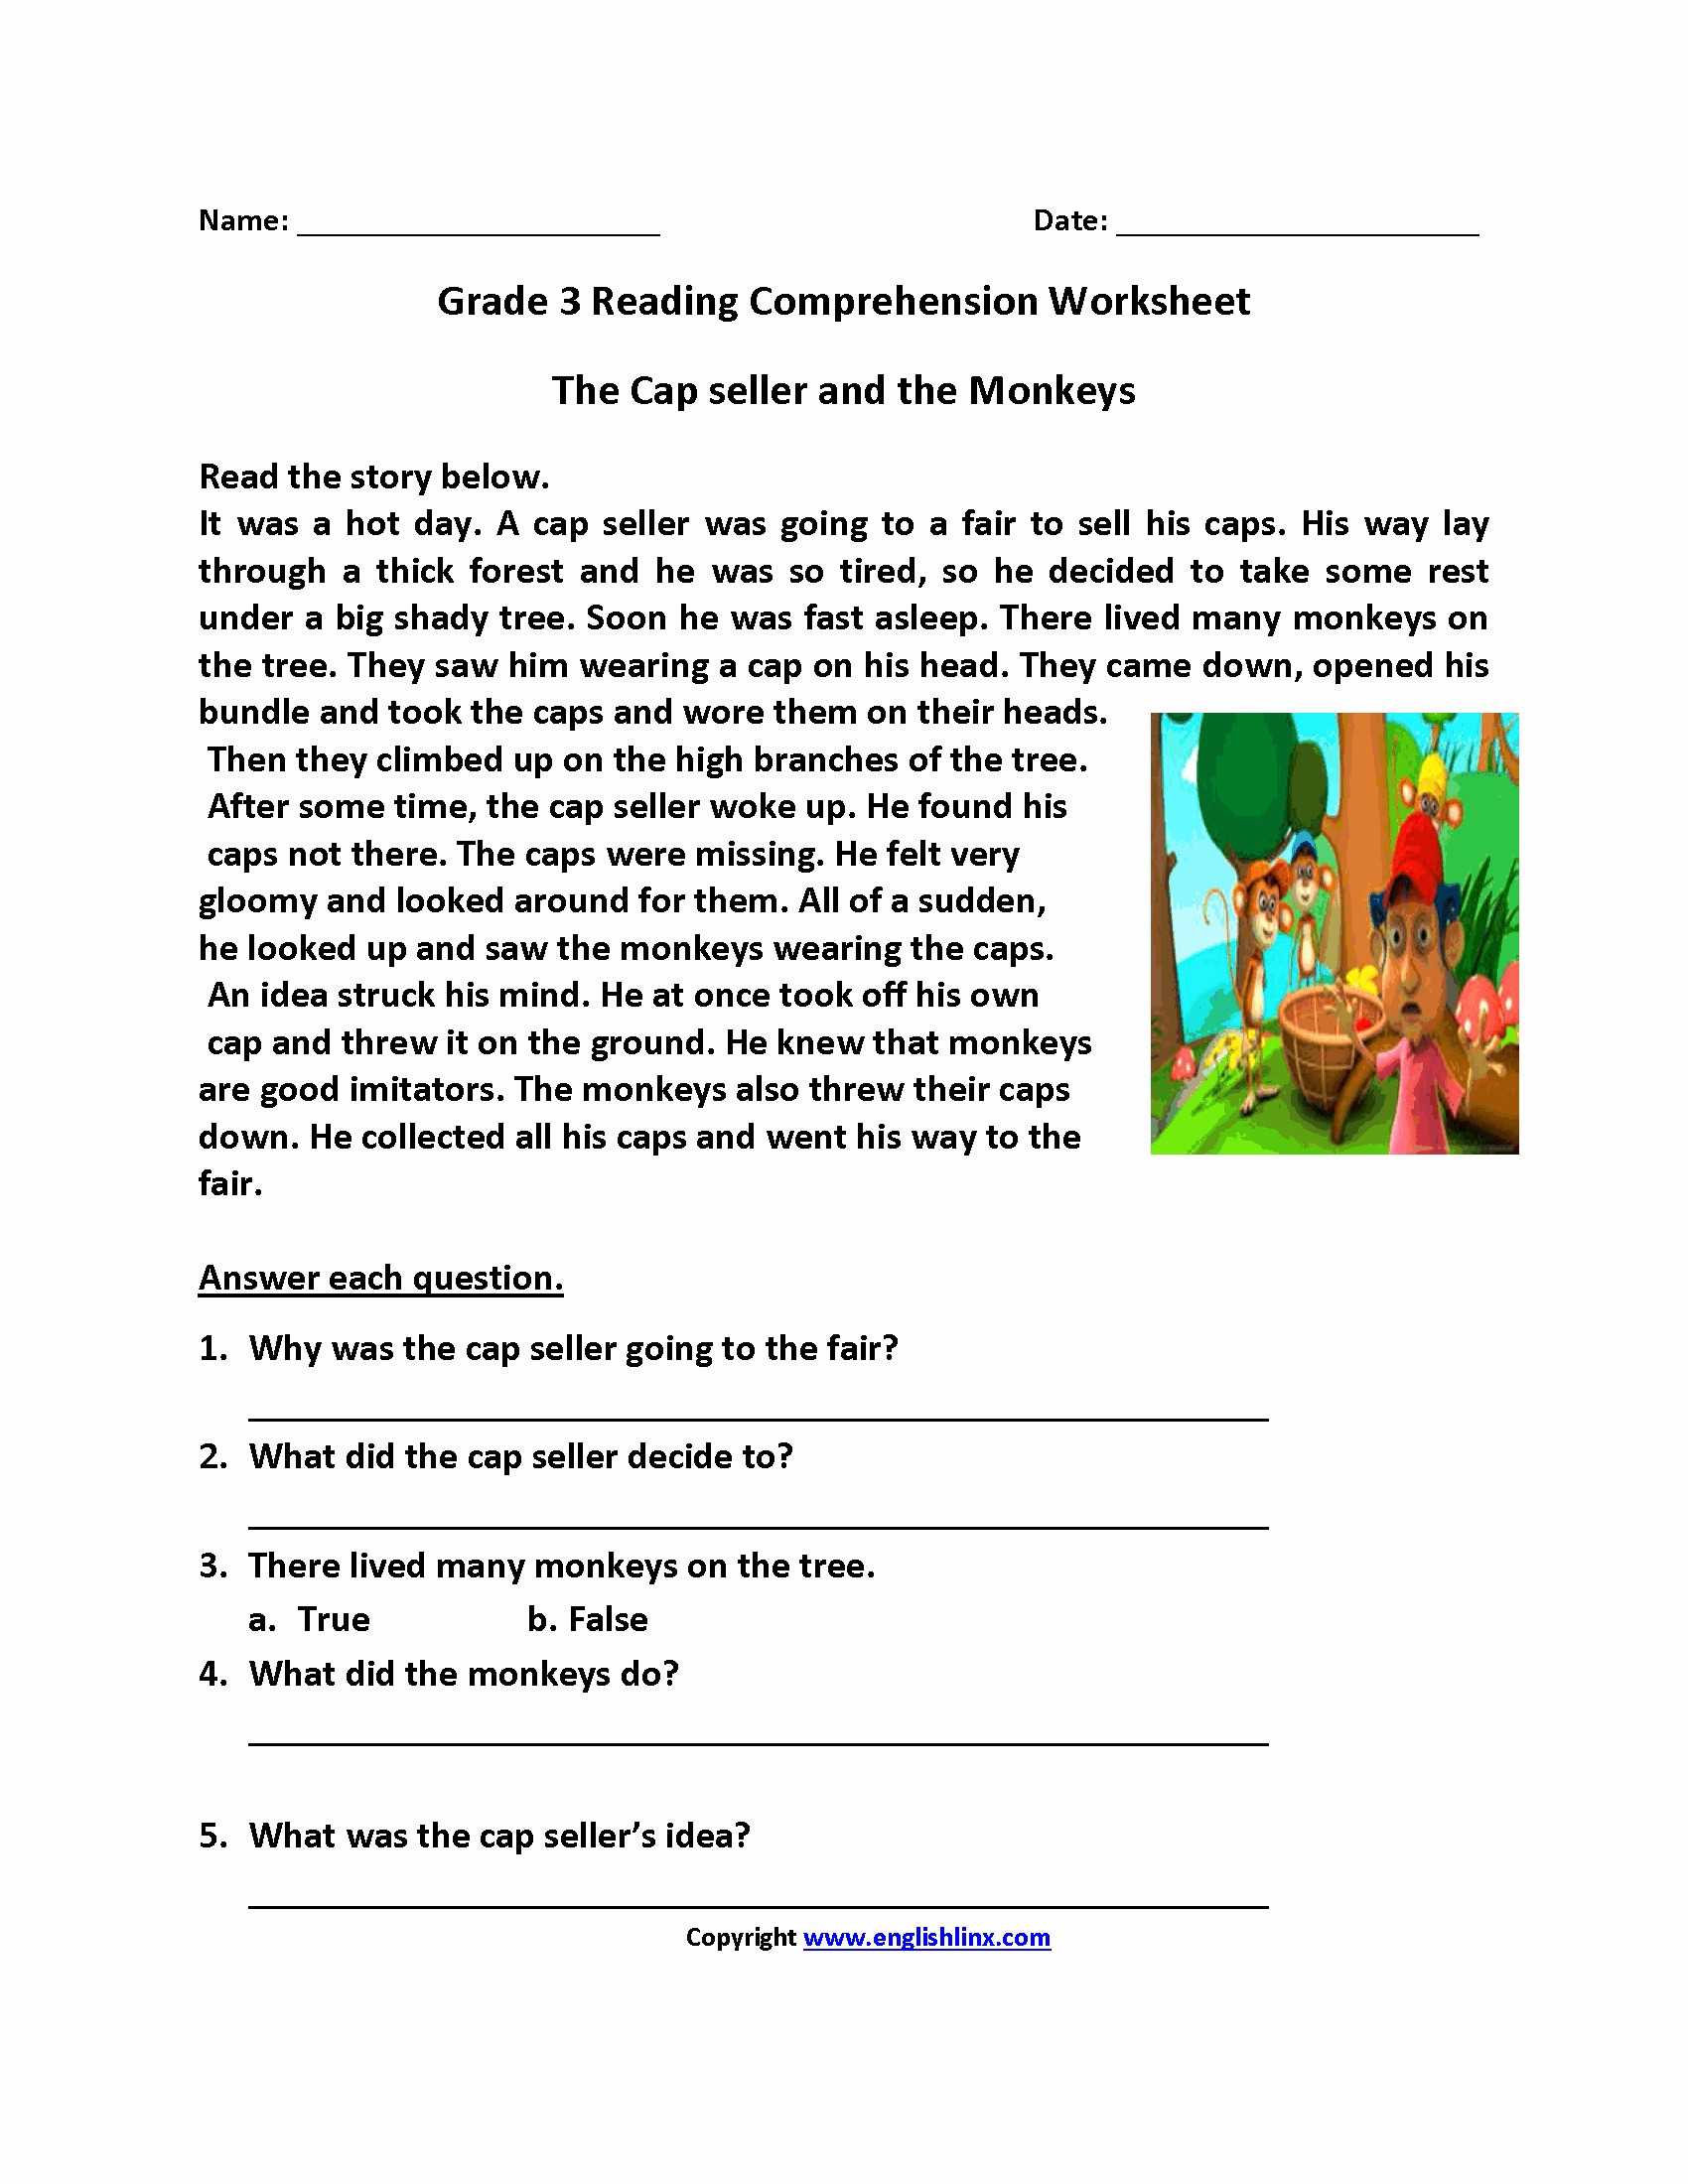 Following Directions Worksheet as Well as Much and Many Worksheets Inspirational 611 Best L2